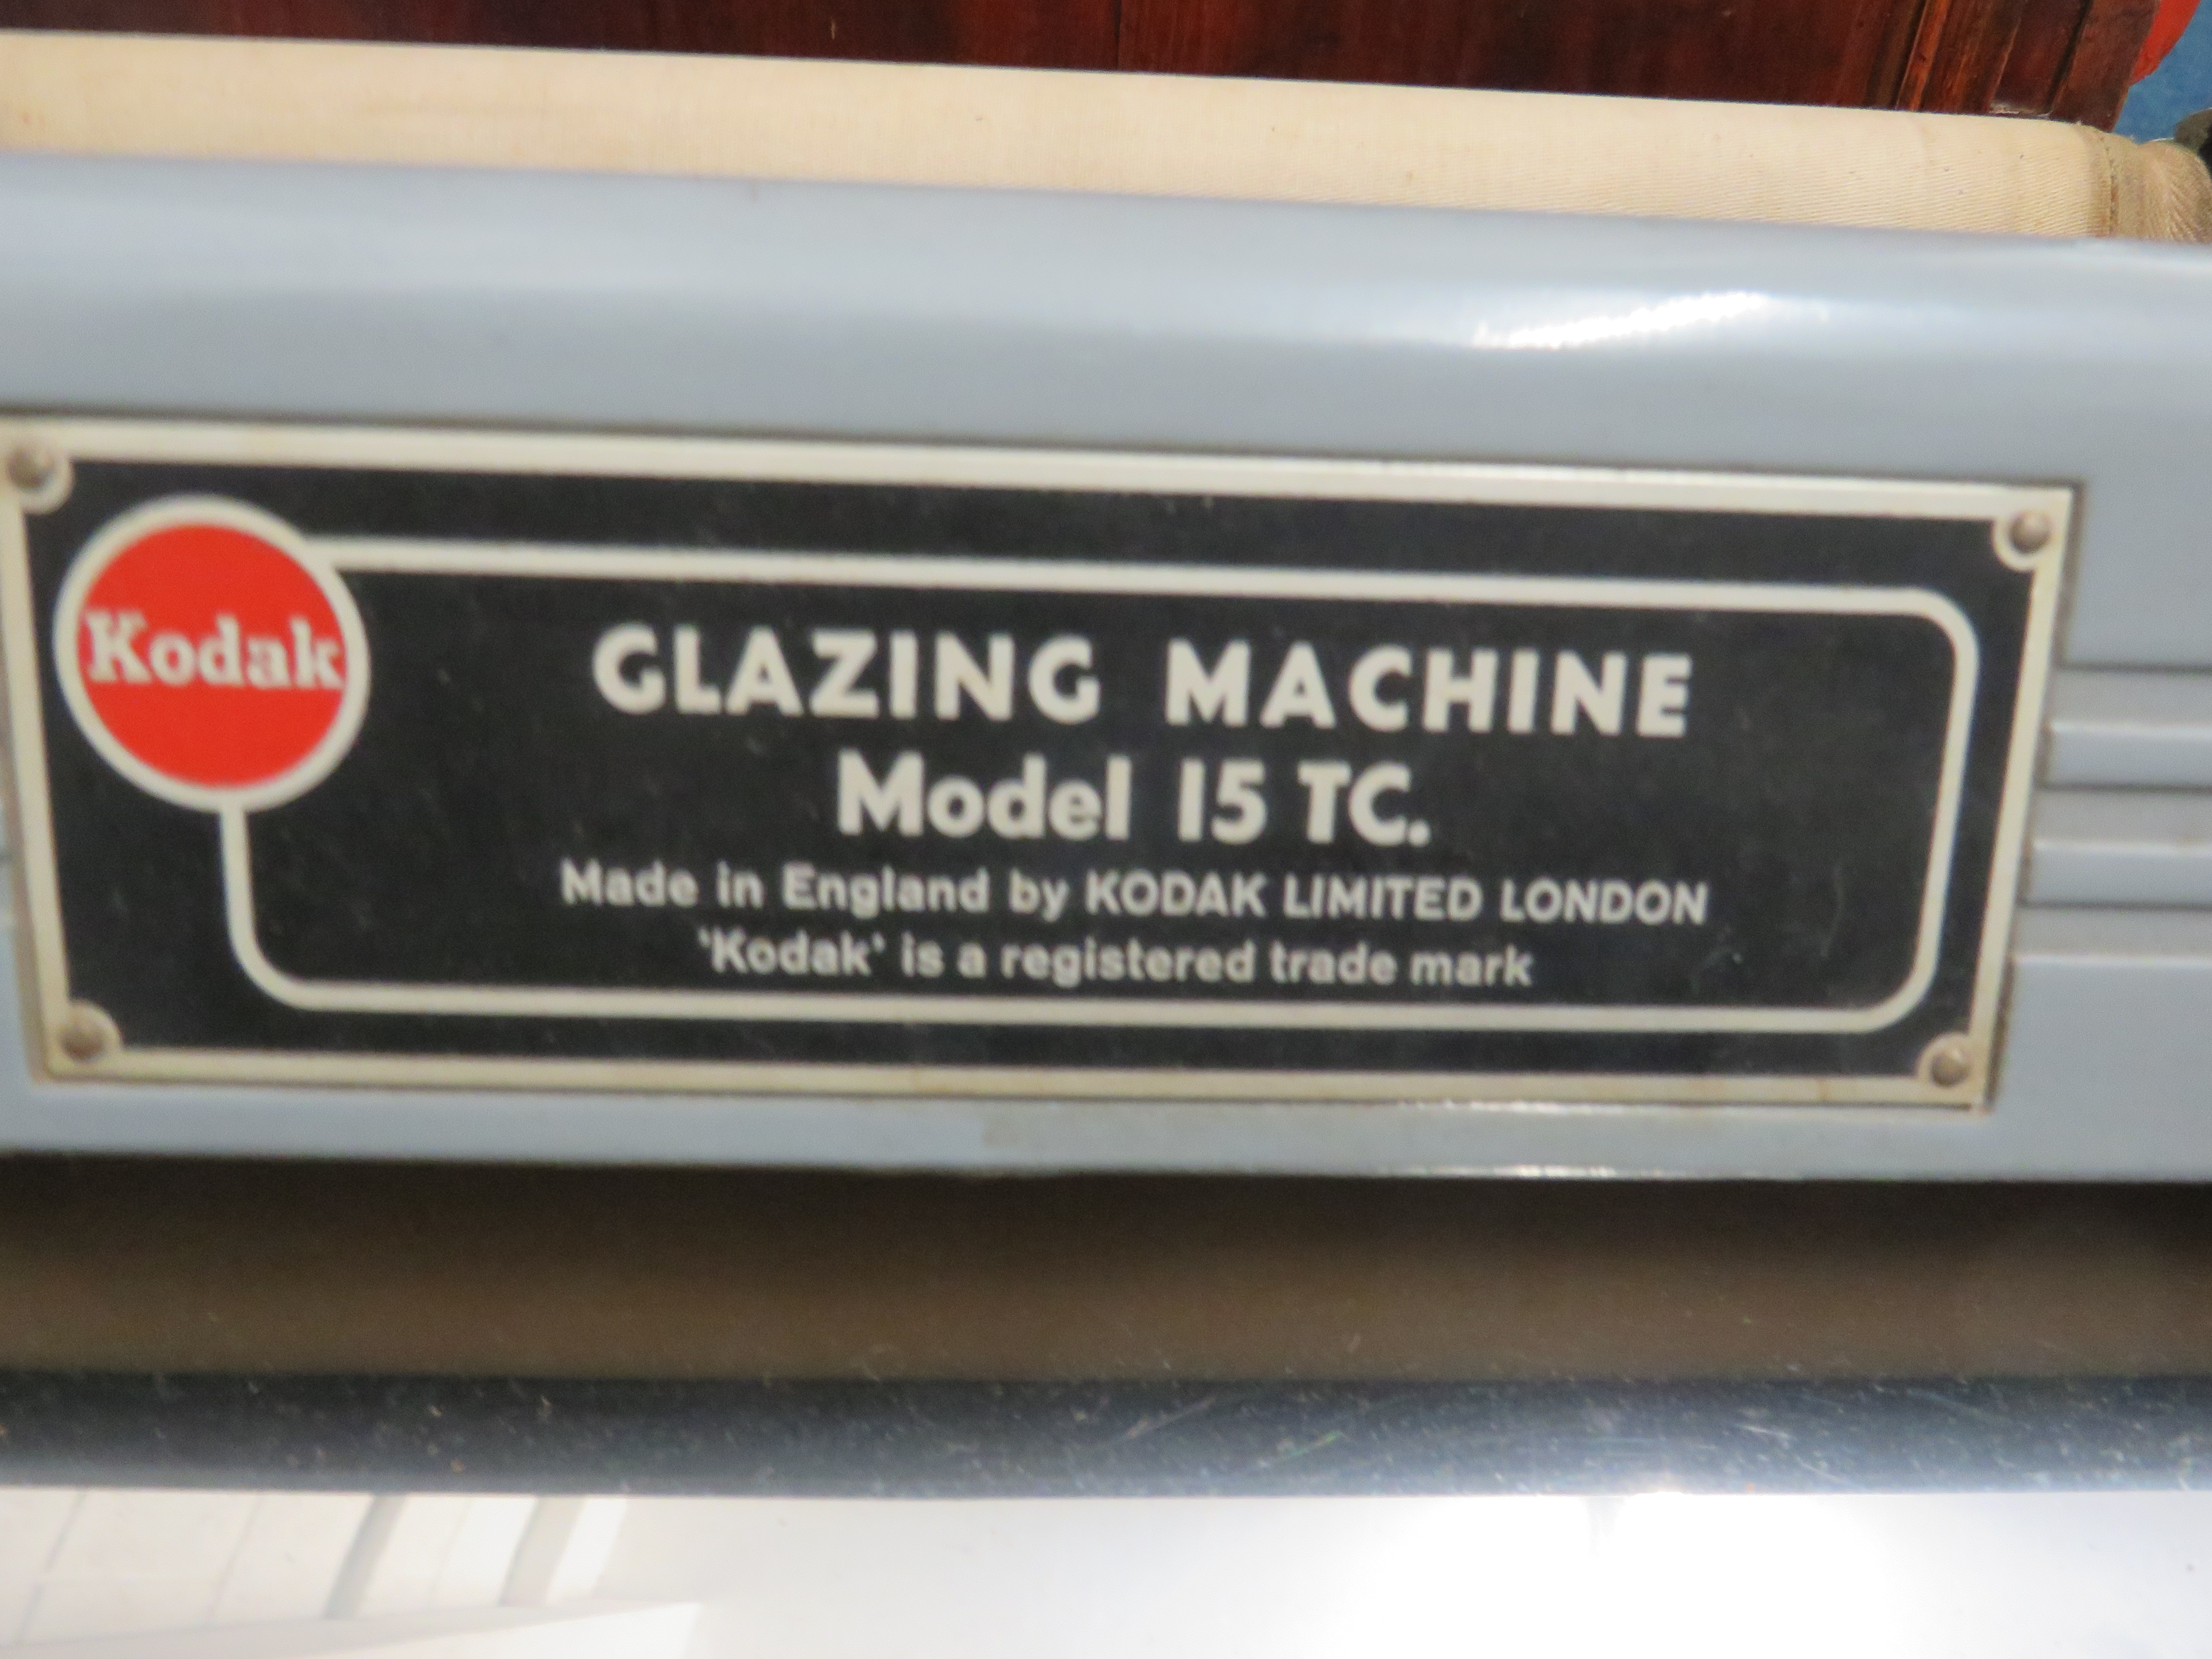 Kodak Limited Glazing Machine Model 15, manufactured in the 1950s, which was used to dry and gloss p - Image 4 of 4